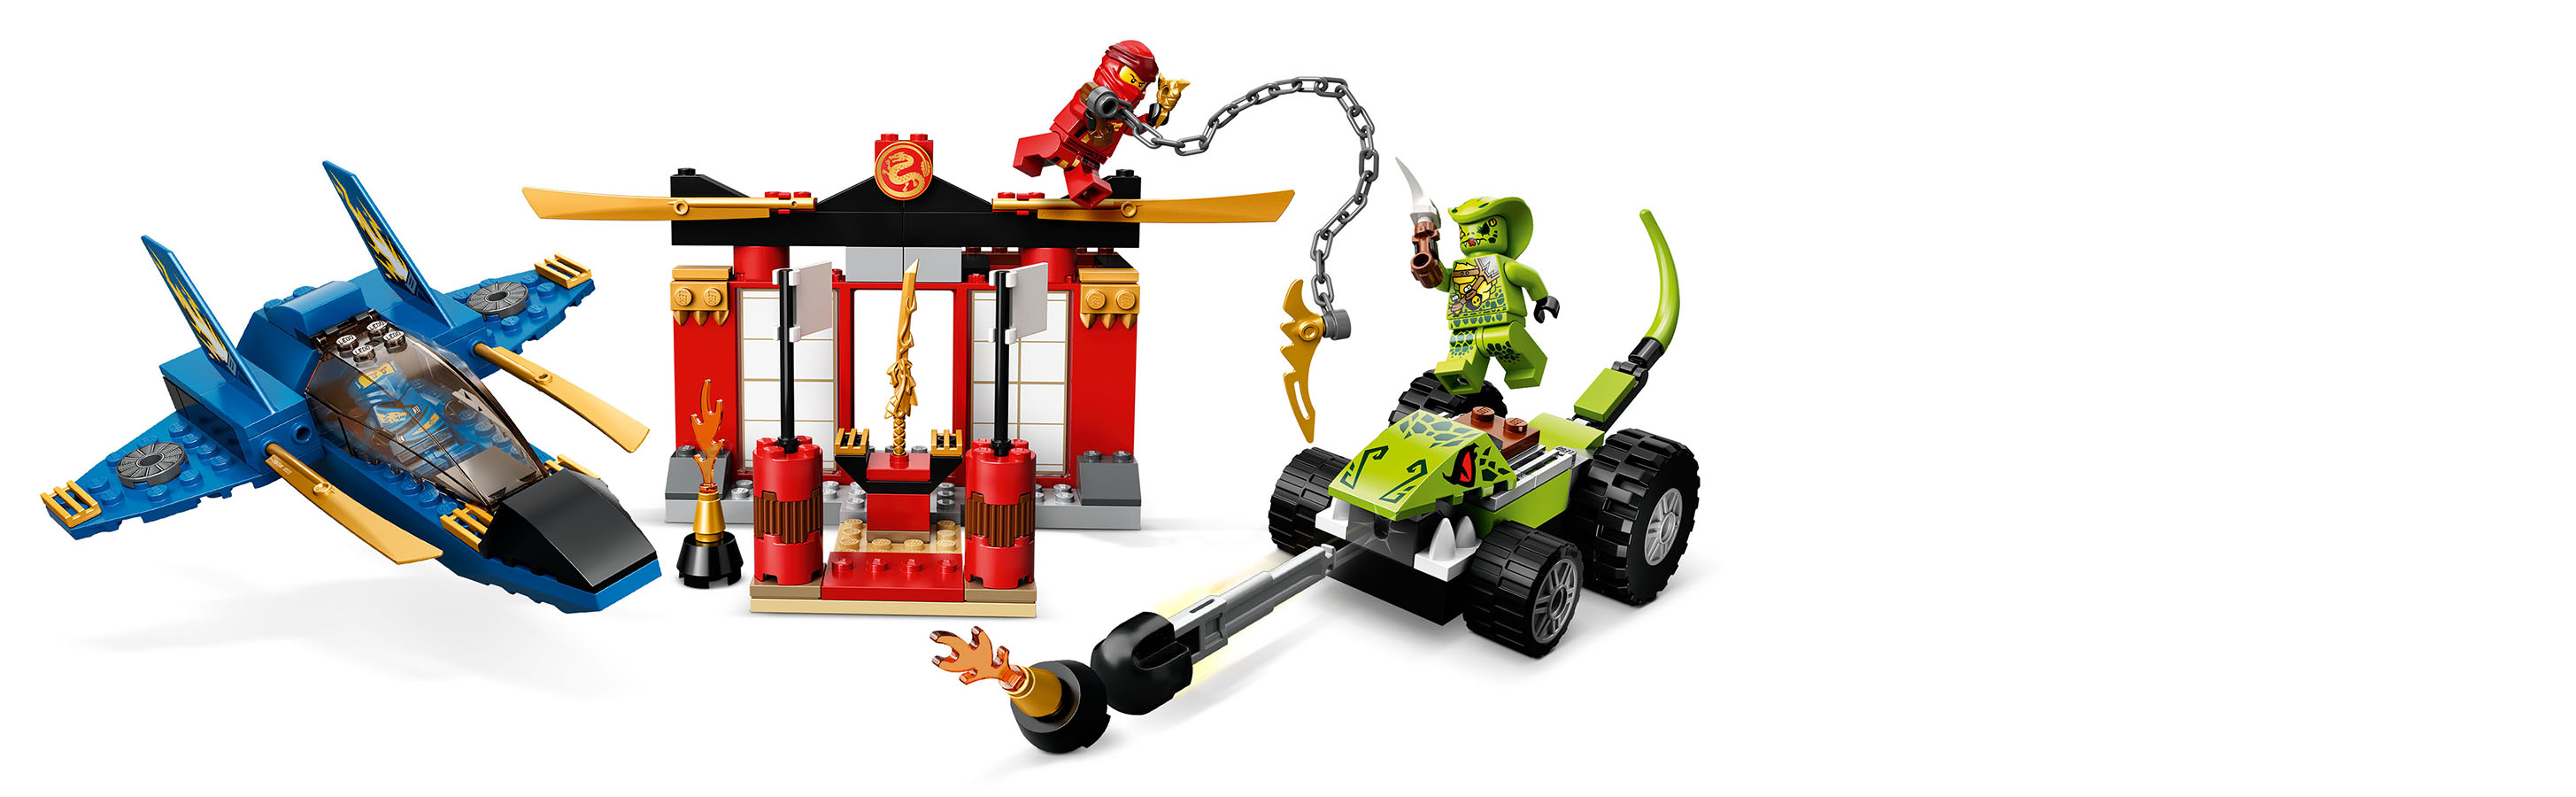 Learn to build with 4+ LEGO® sets